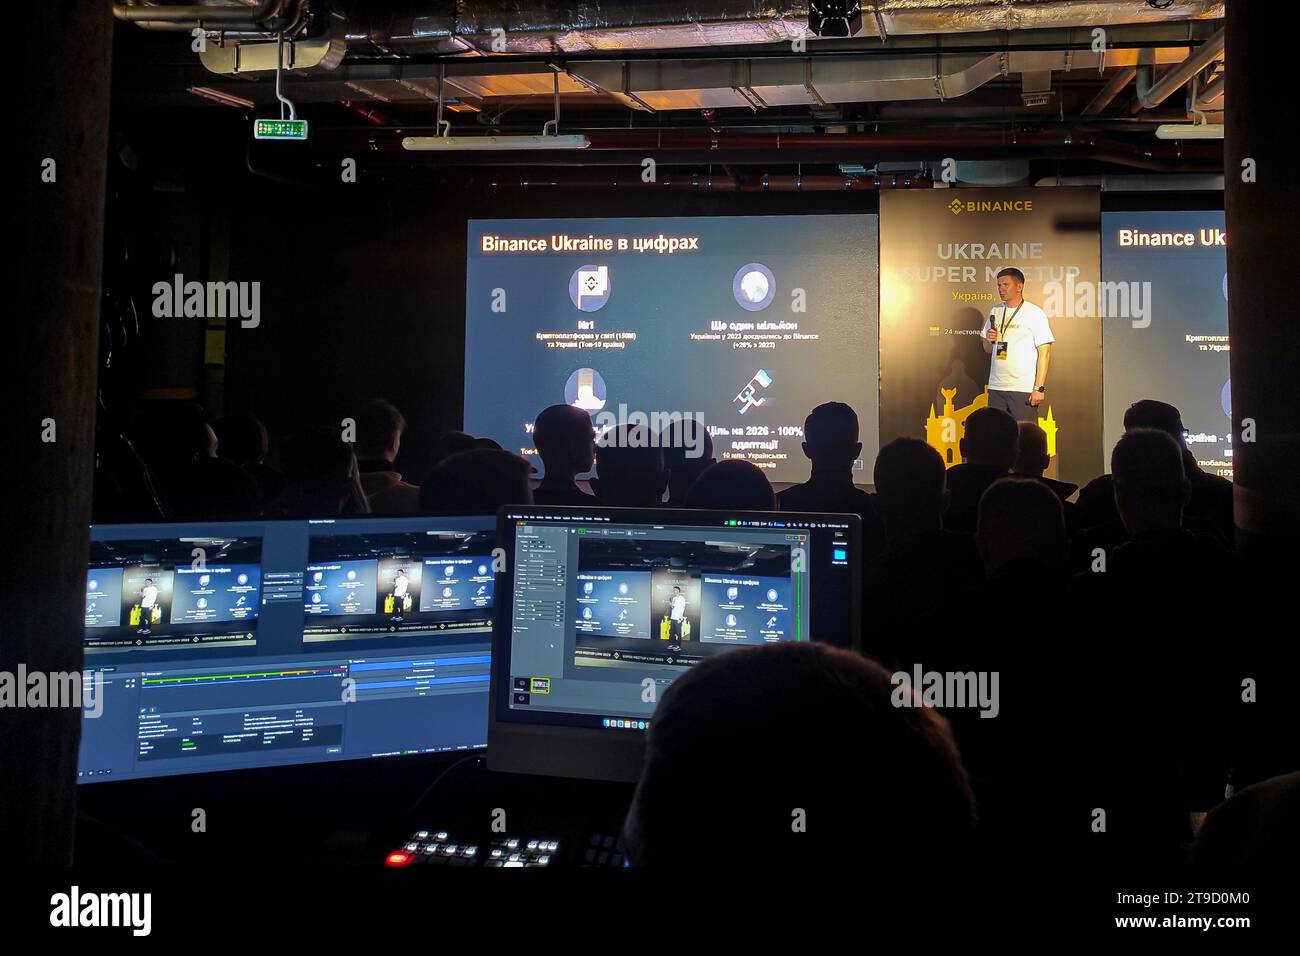 Binance Ukraine Super Meetup conference about cryptocurrency Stock Photo